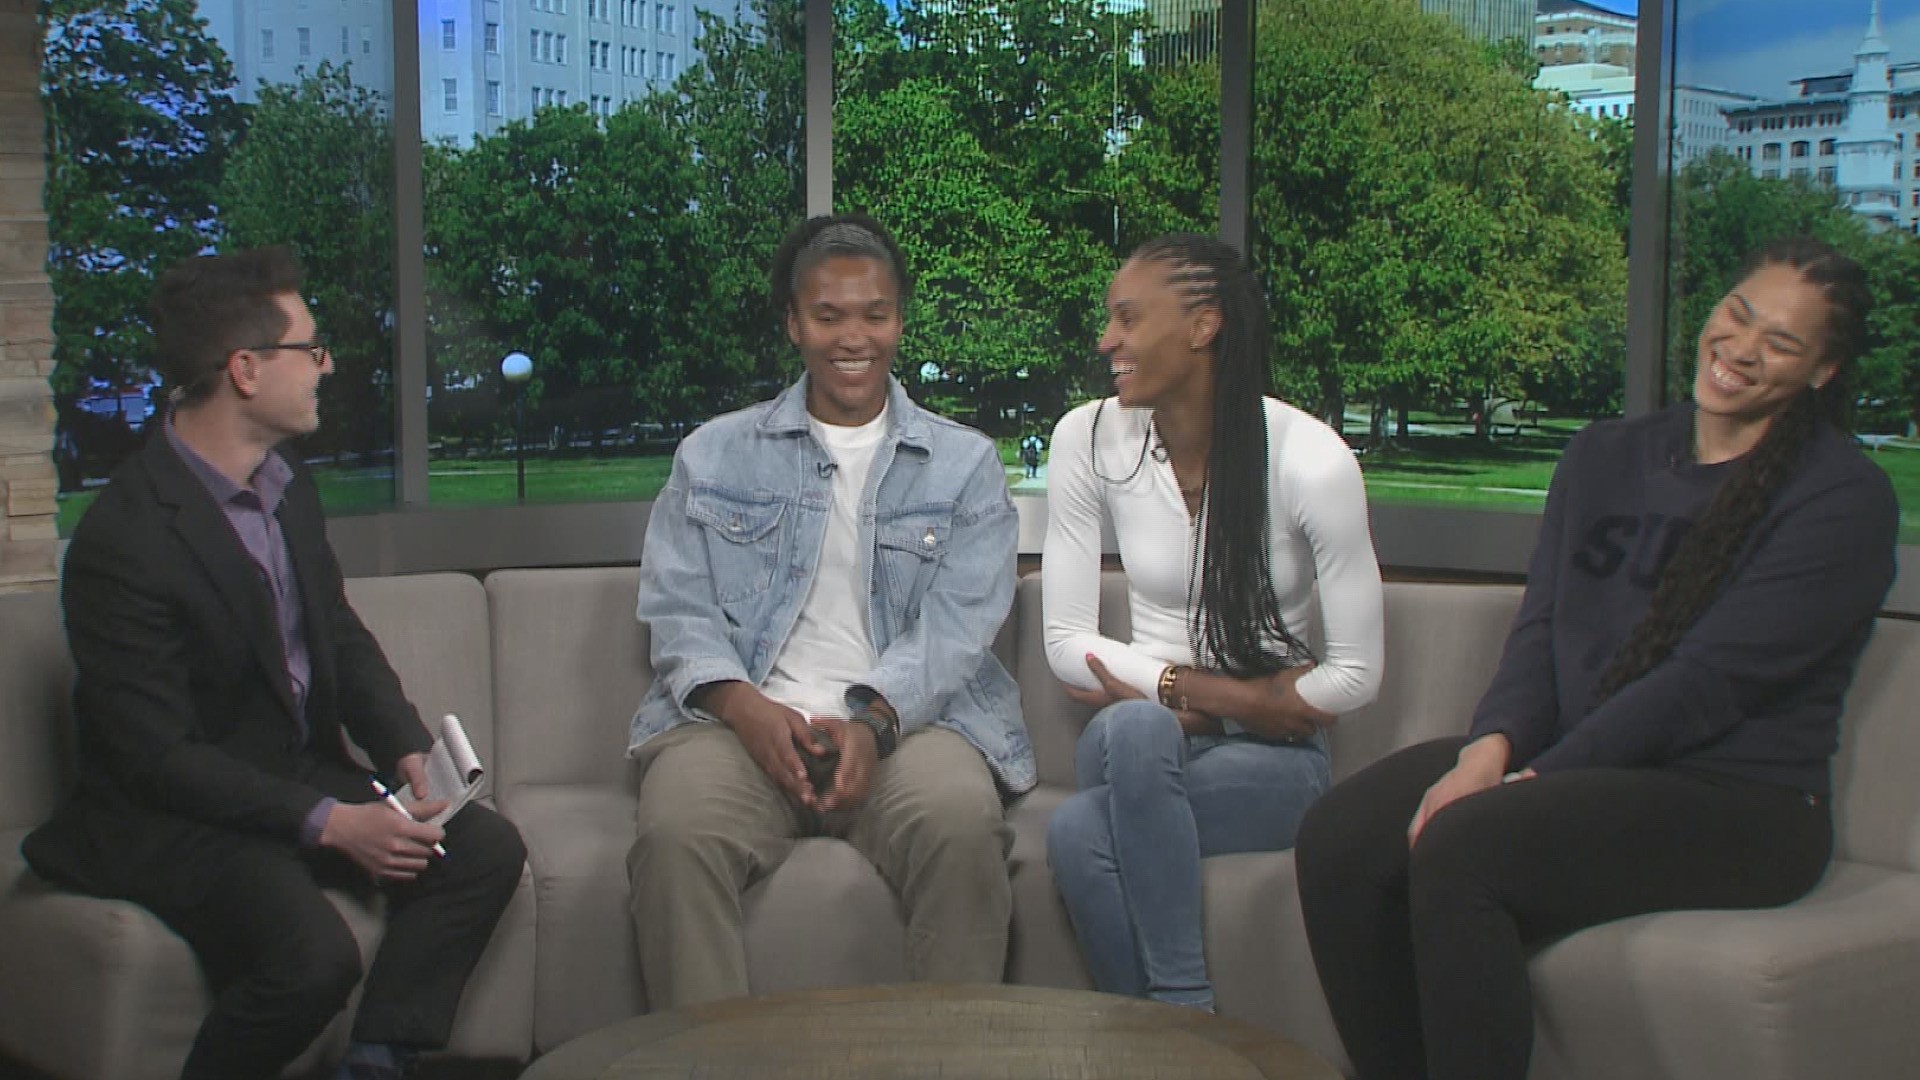 Alyssa Thomas, DeWanna Bonner and Brionna Jones sit down with FOX61 to revisit last season's postseason run, and to discuss the growth of women's basketball.